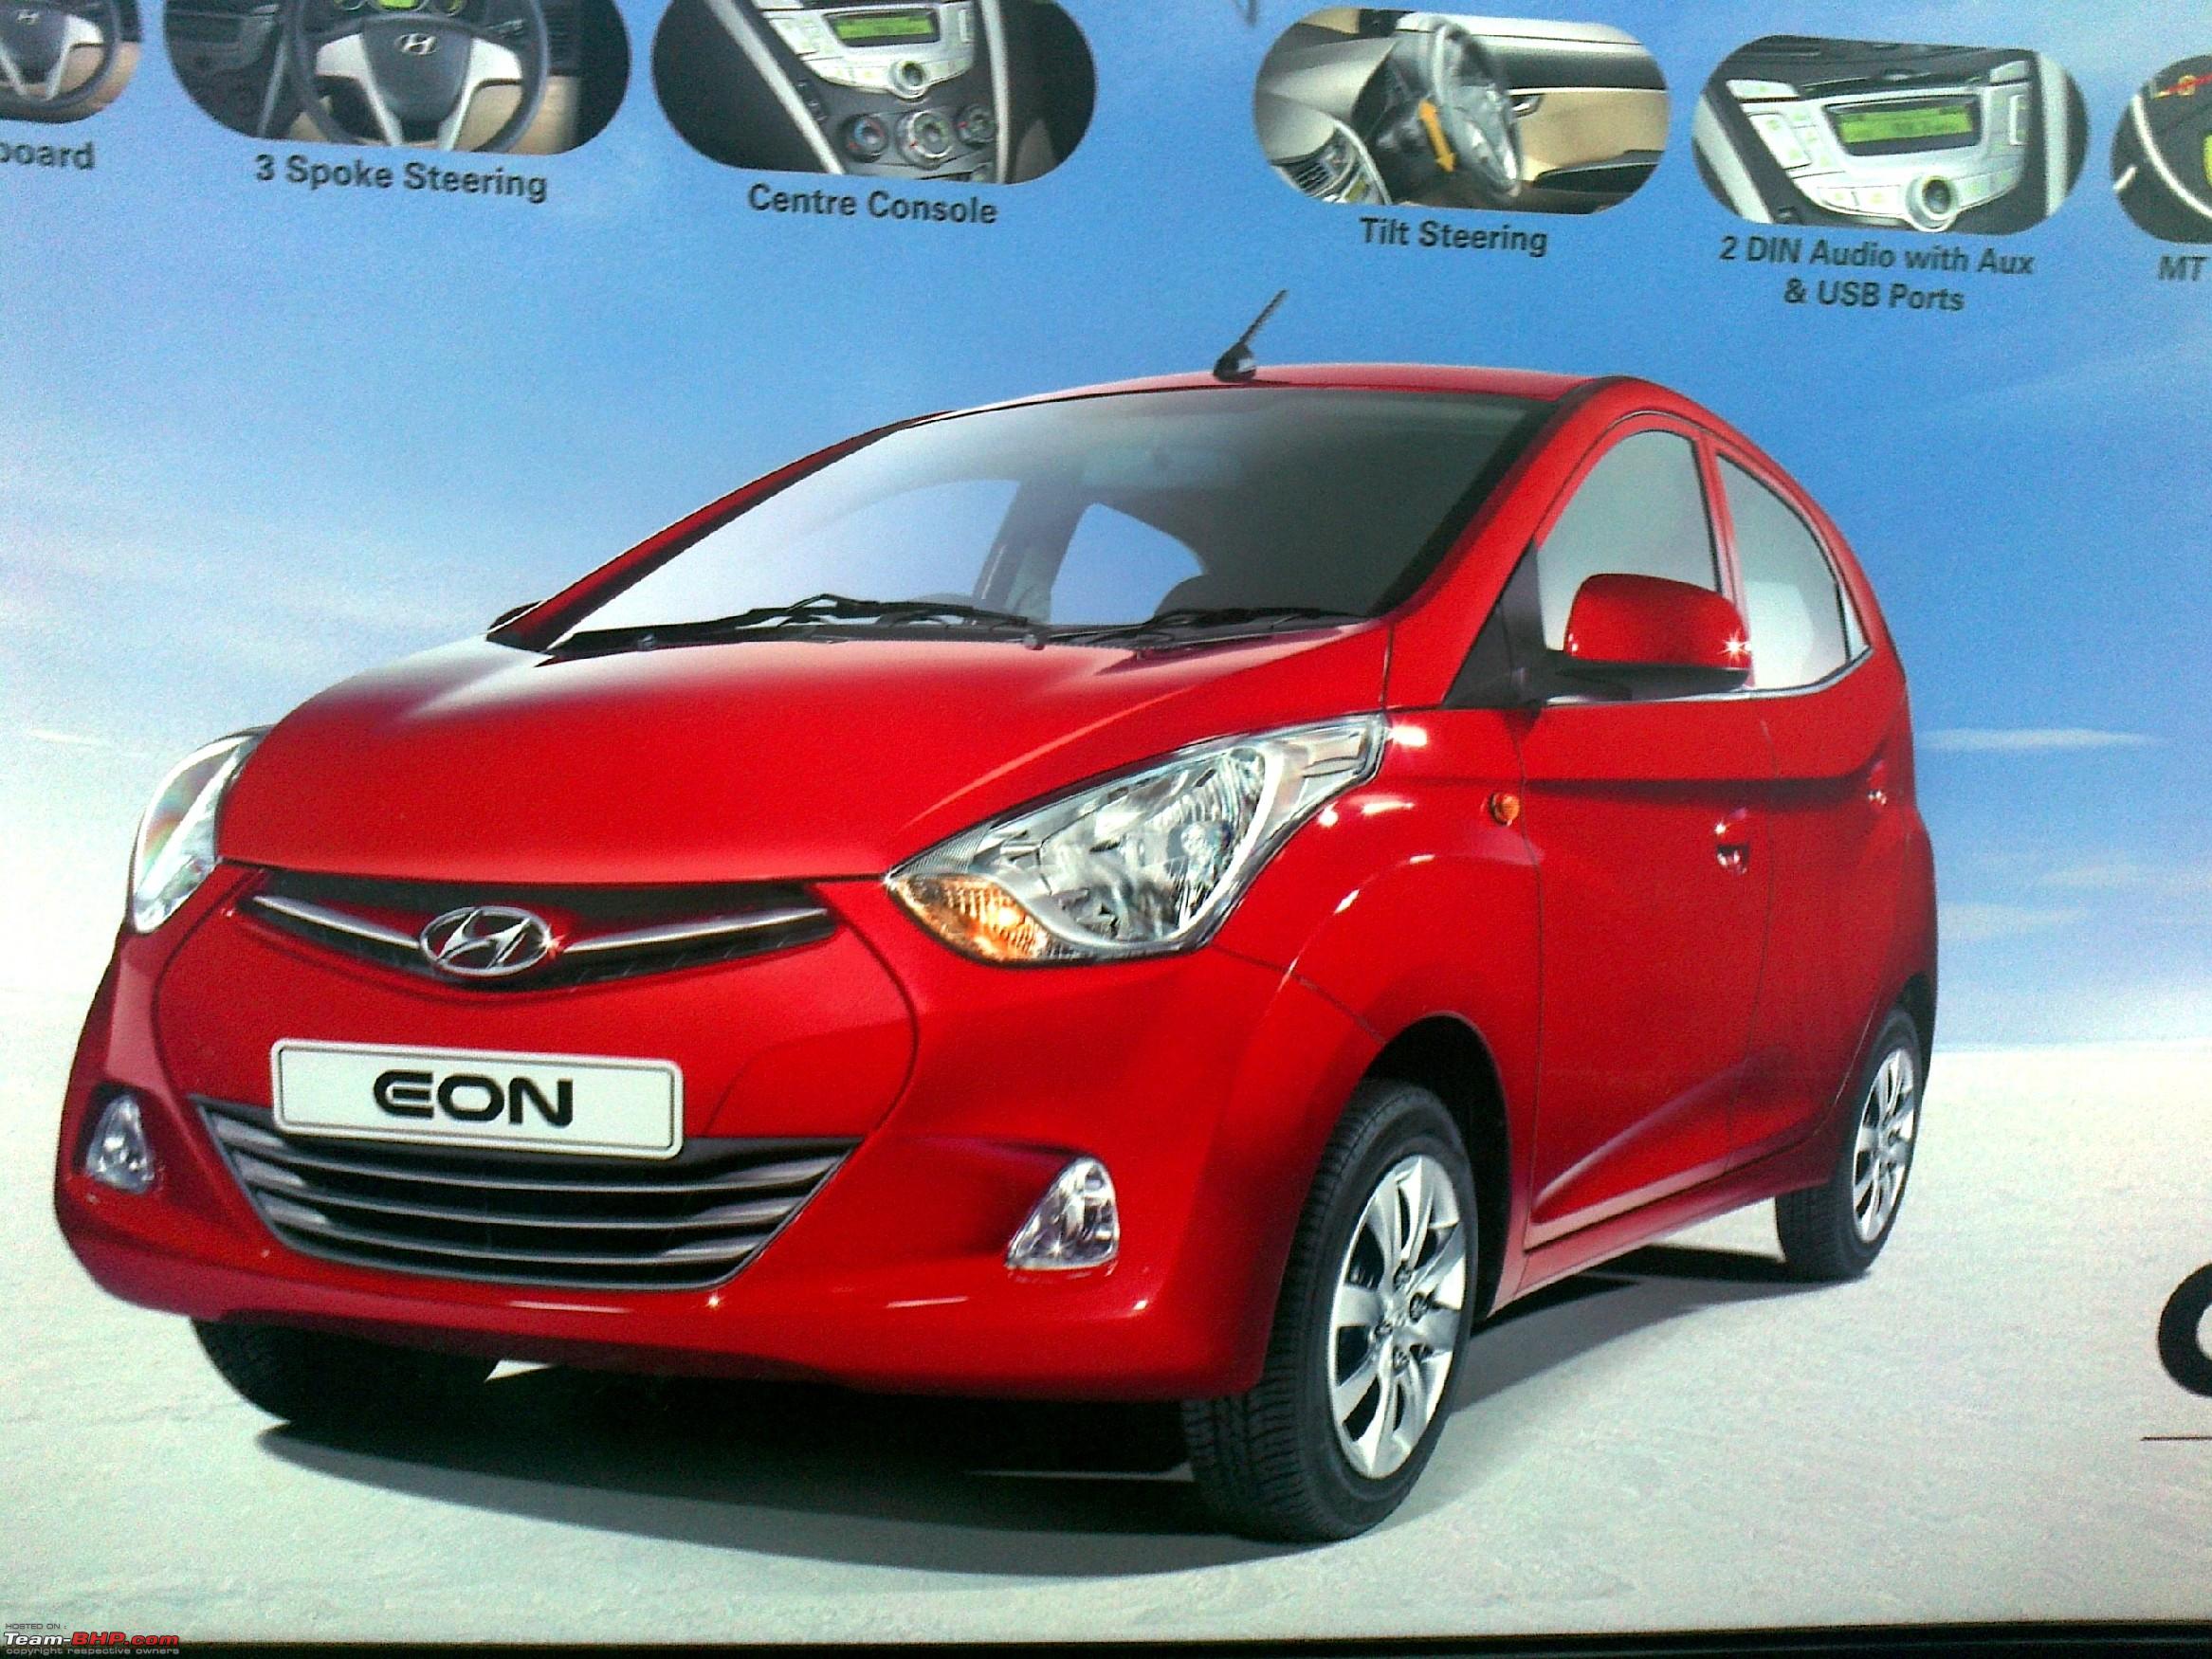 Hyundai EON Now Launched! Prices between 2.7L - 3.71L Ex-Delhi! - Page ...